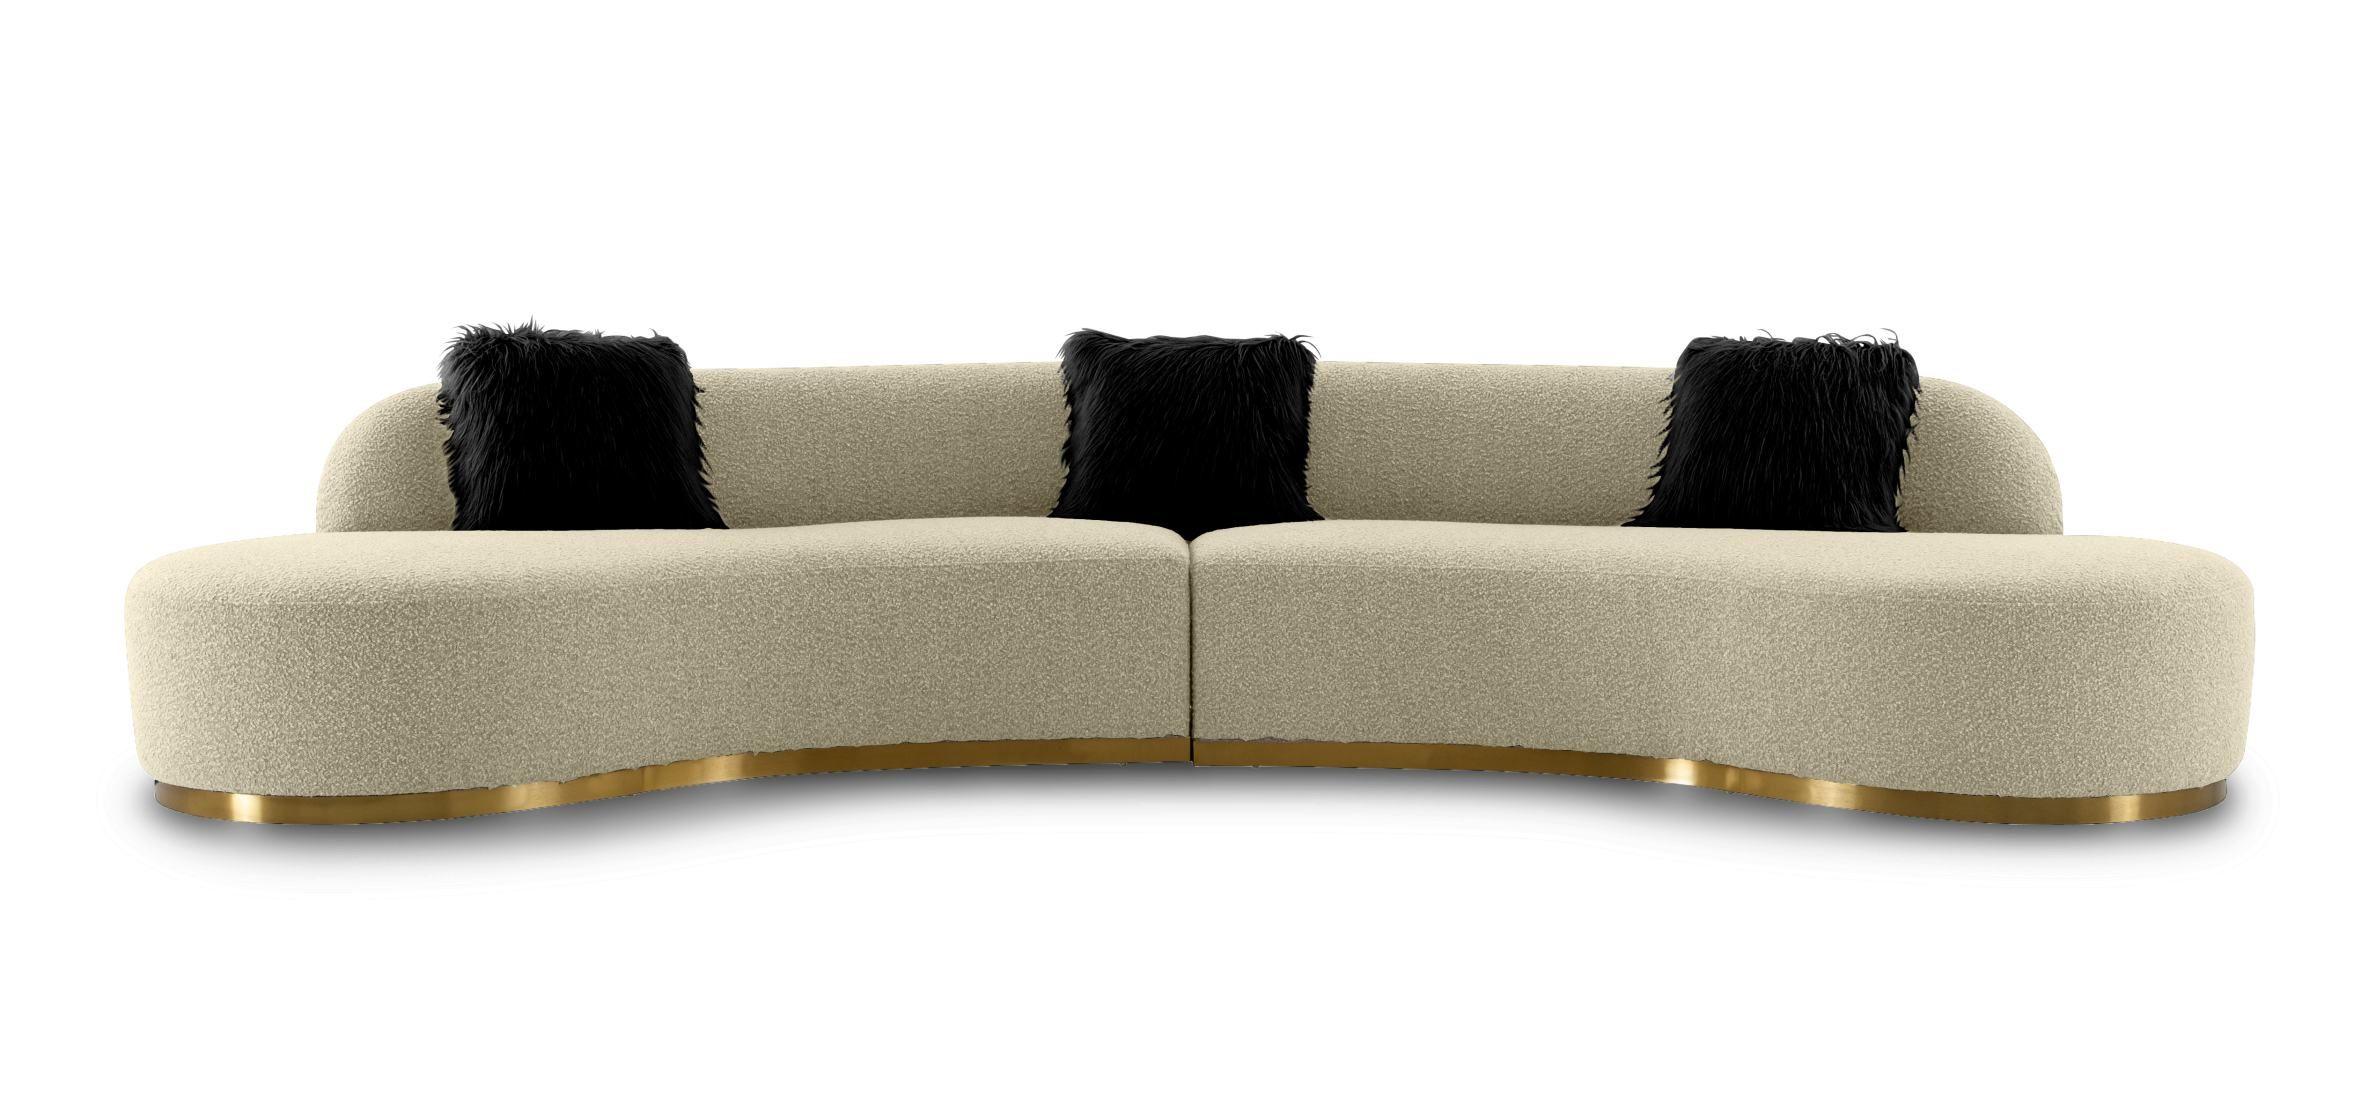 Contemporary, Modern Sectional Sofa VGODZW-943-BGE-SECT VGODZW-943-BGE-SECT in Beige Fabric